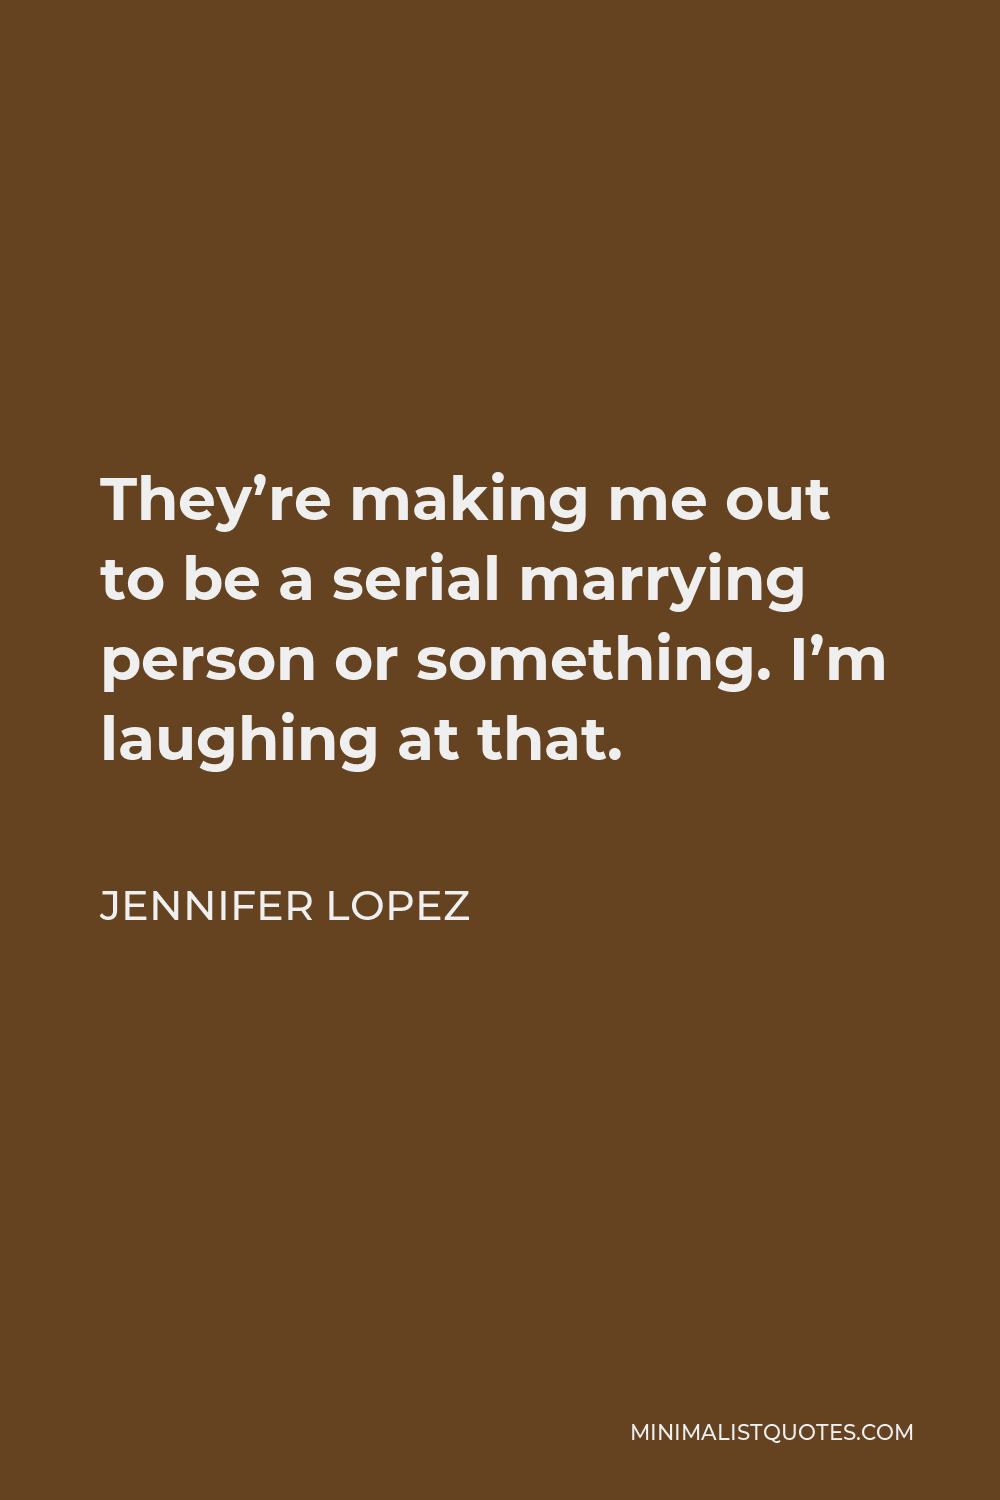 Jennifer Lopez Quote - They’re making me out to be a serial marrying person or something. I’m laughing at that.